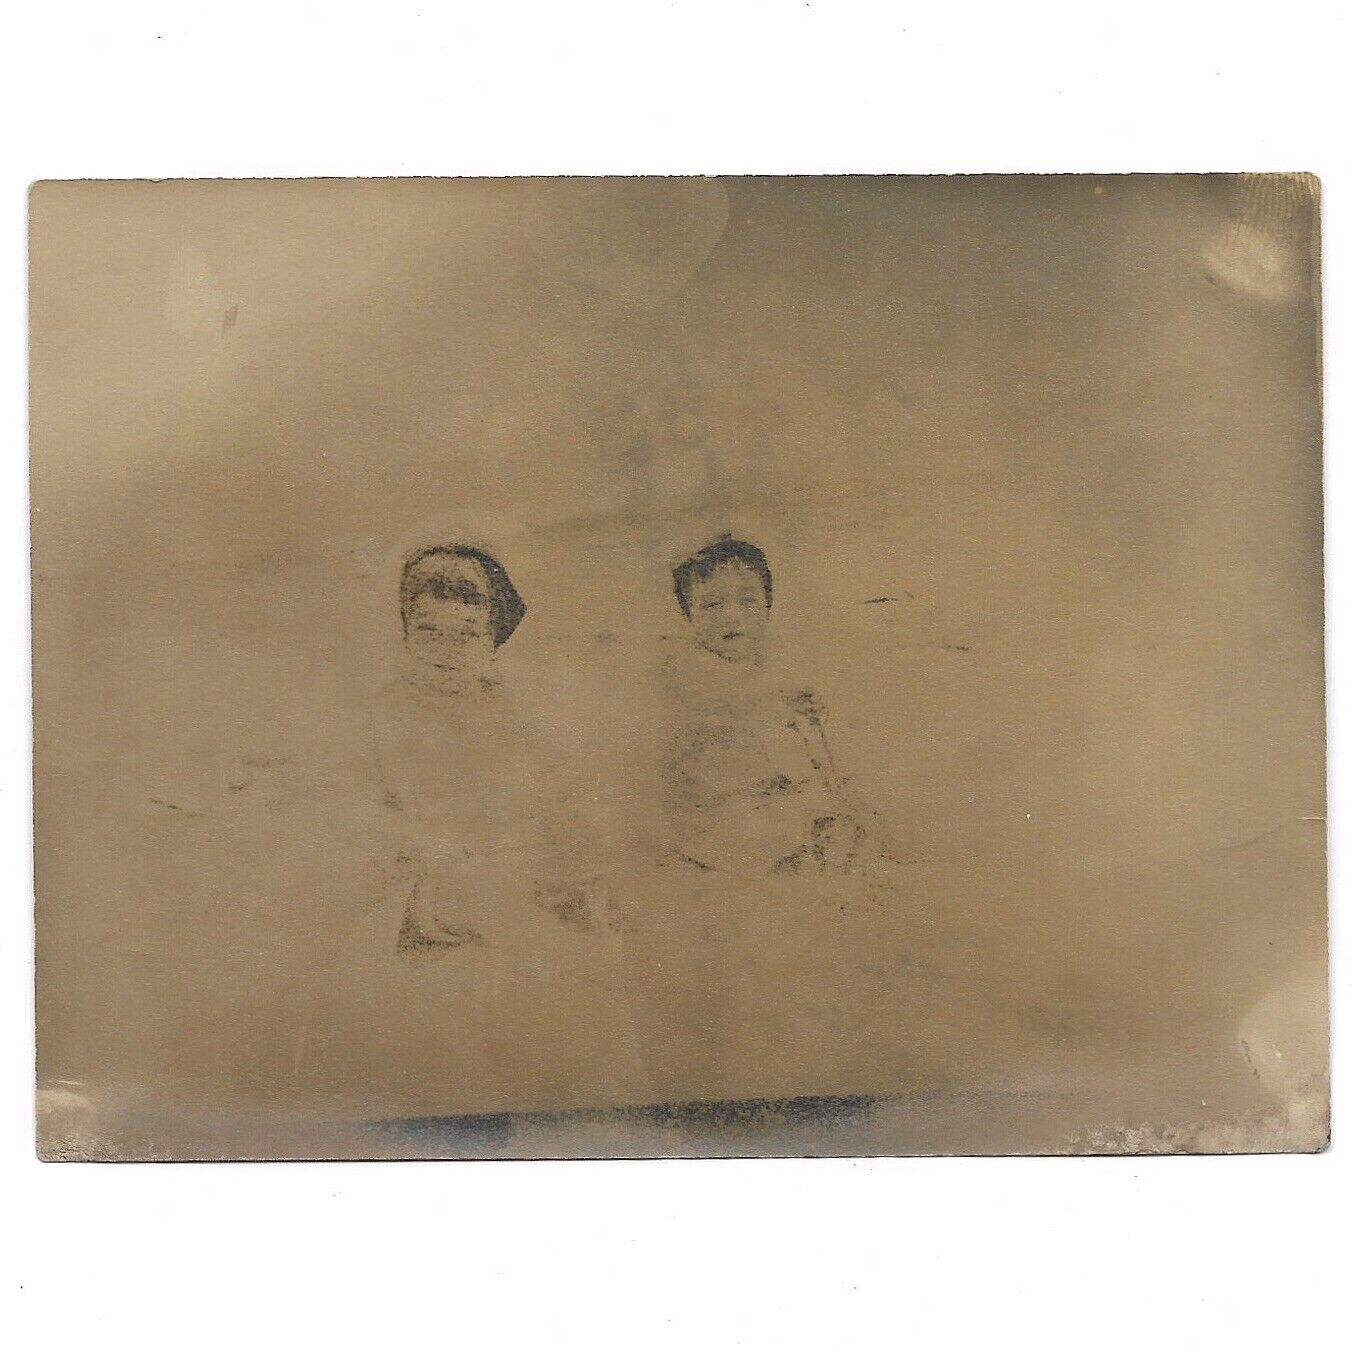 Antique Haunted Photo Childrens Faces Overexposed Cloudy Ghostly Creepy Spooky